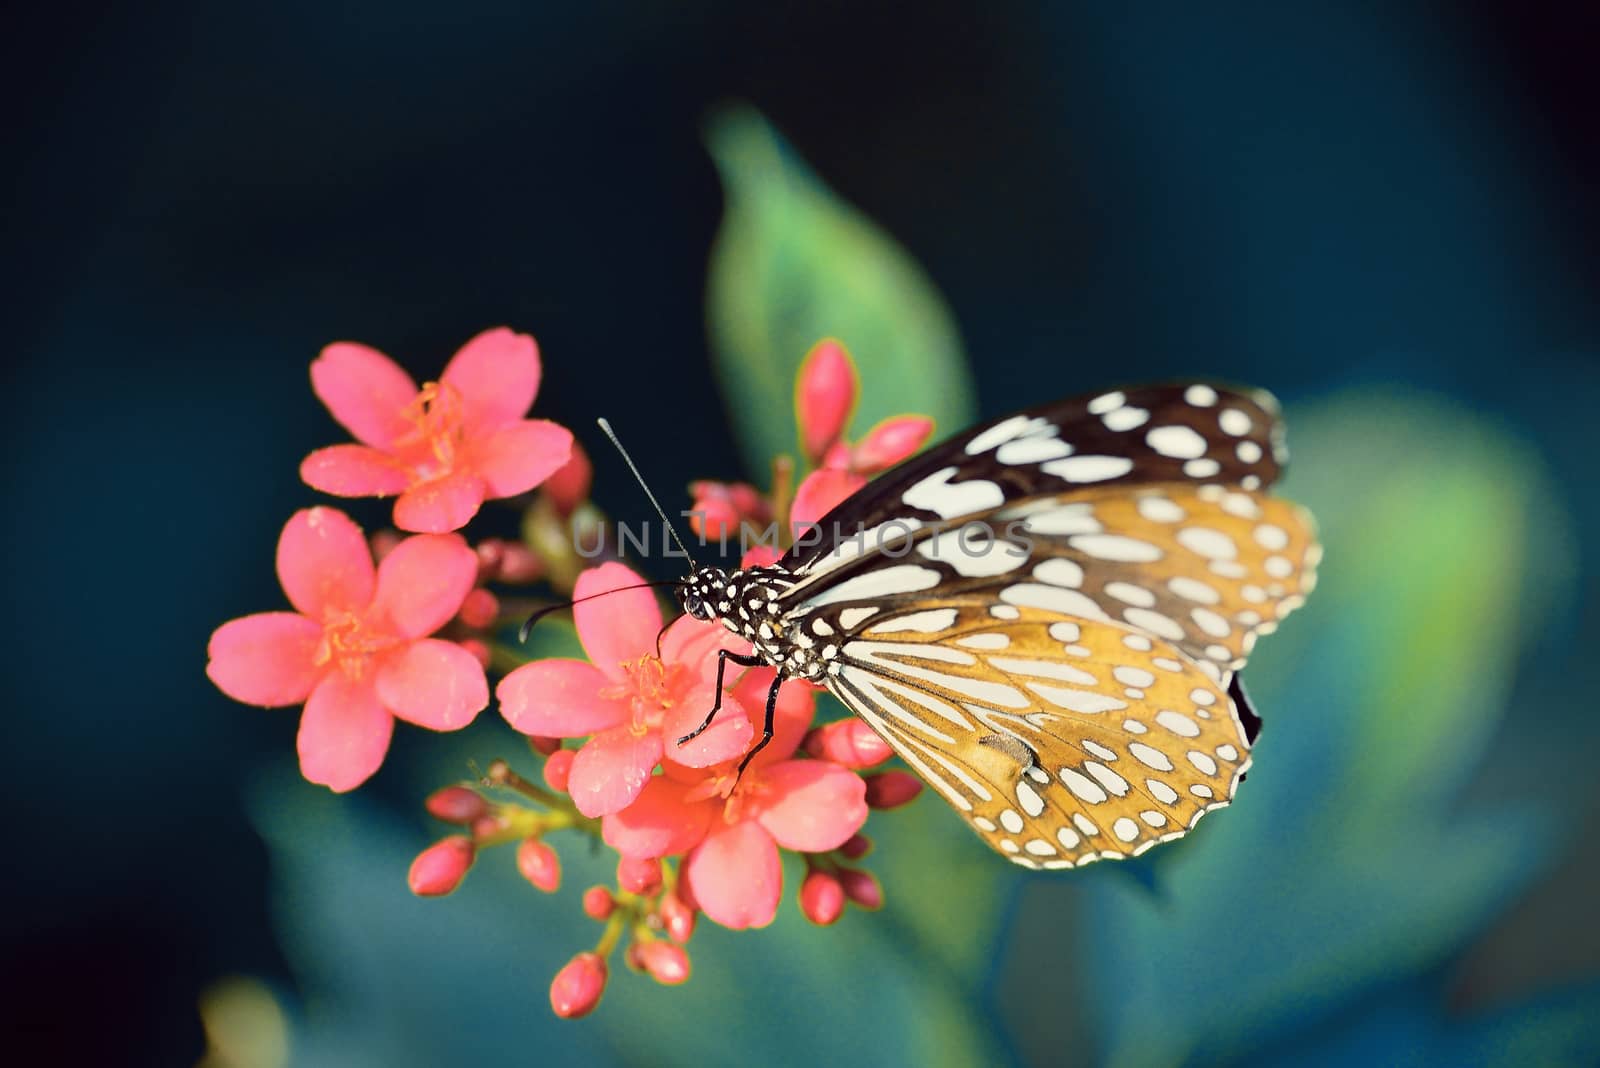 beautiful butterfly sitting in the flower (vintage tone style)